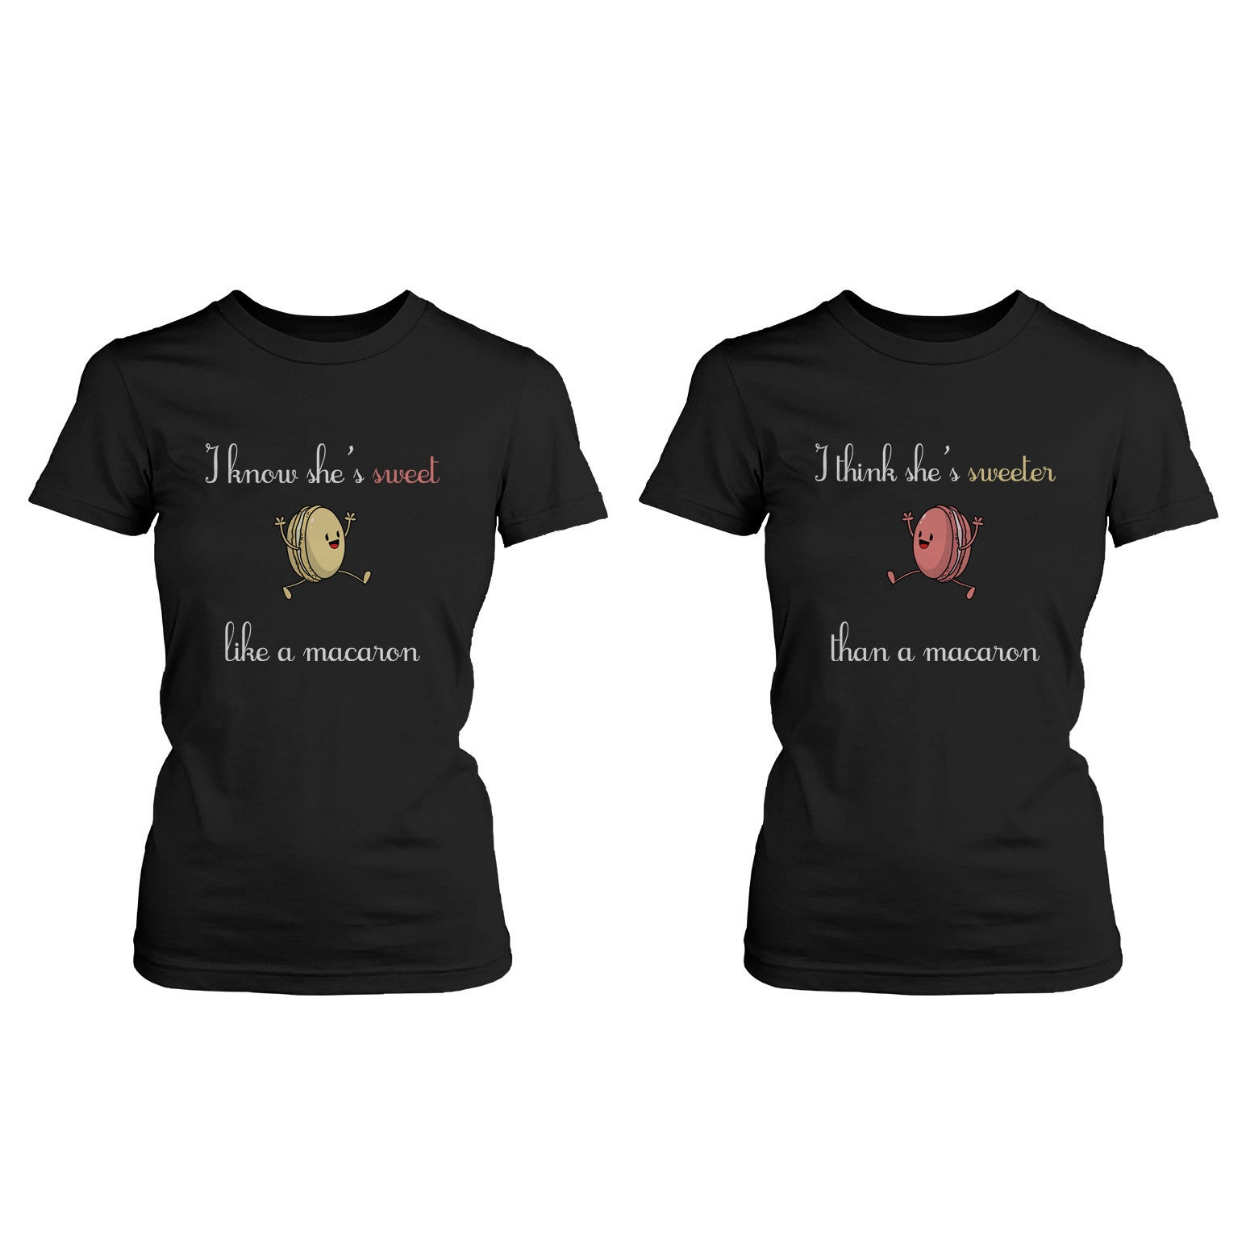 Sweet Like Macaron And Sweeter Than Macaron Best Friends T-Shirts Bff Cute Matching Tees - 365 In Love